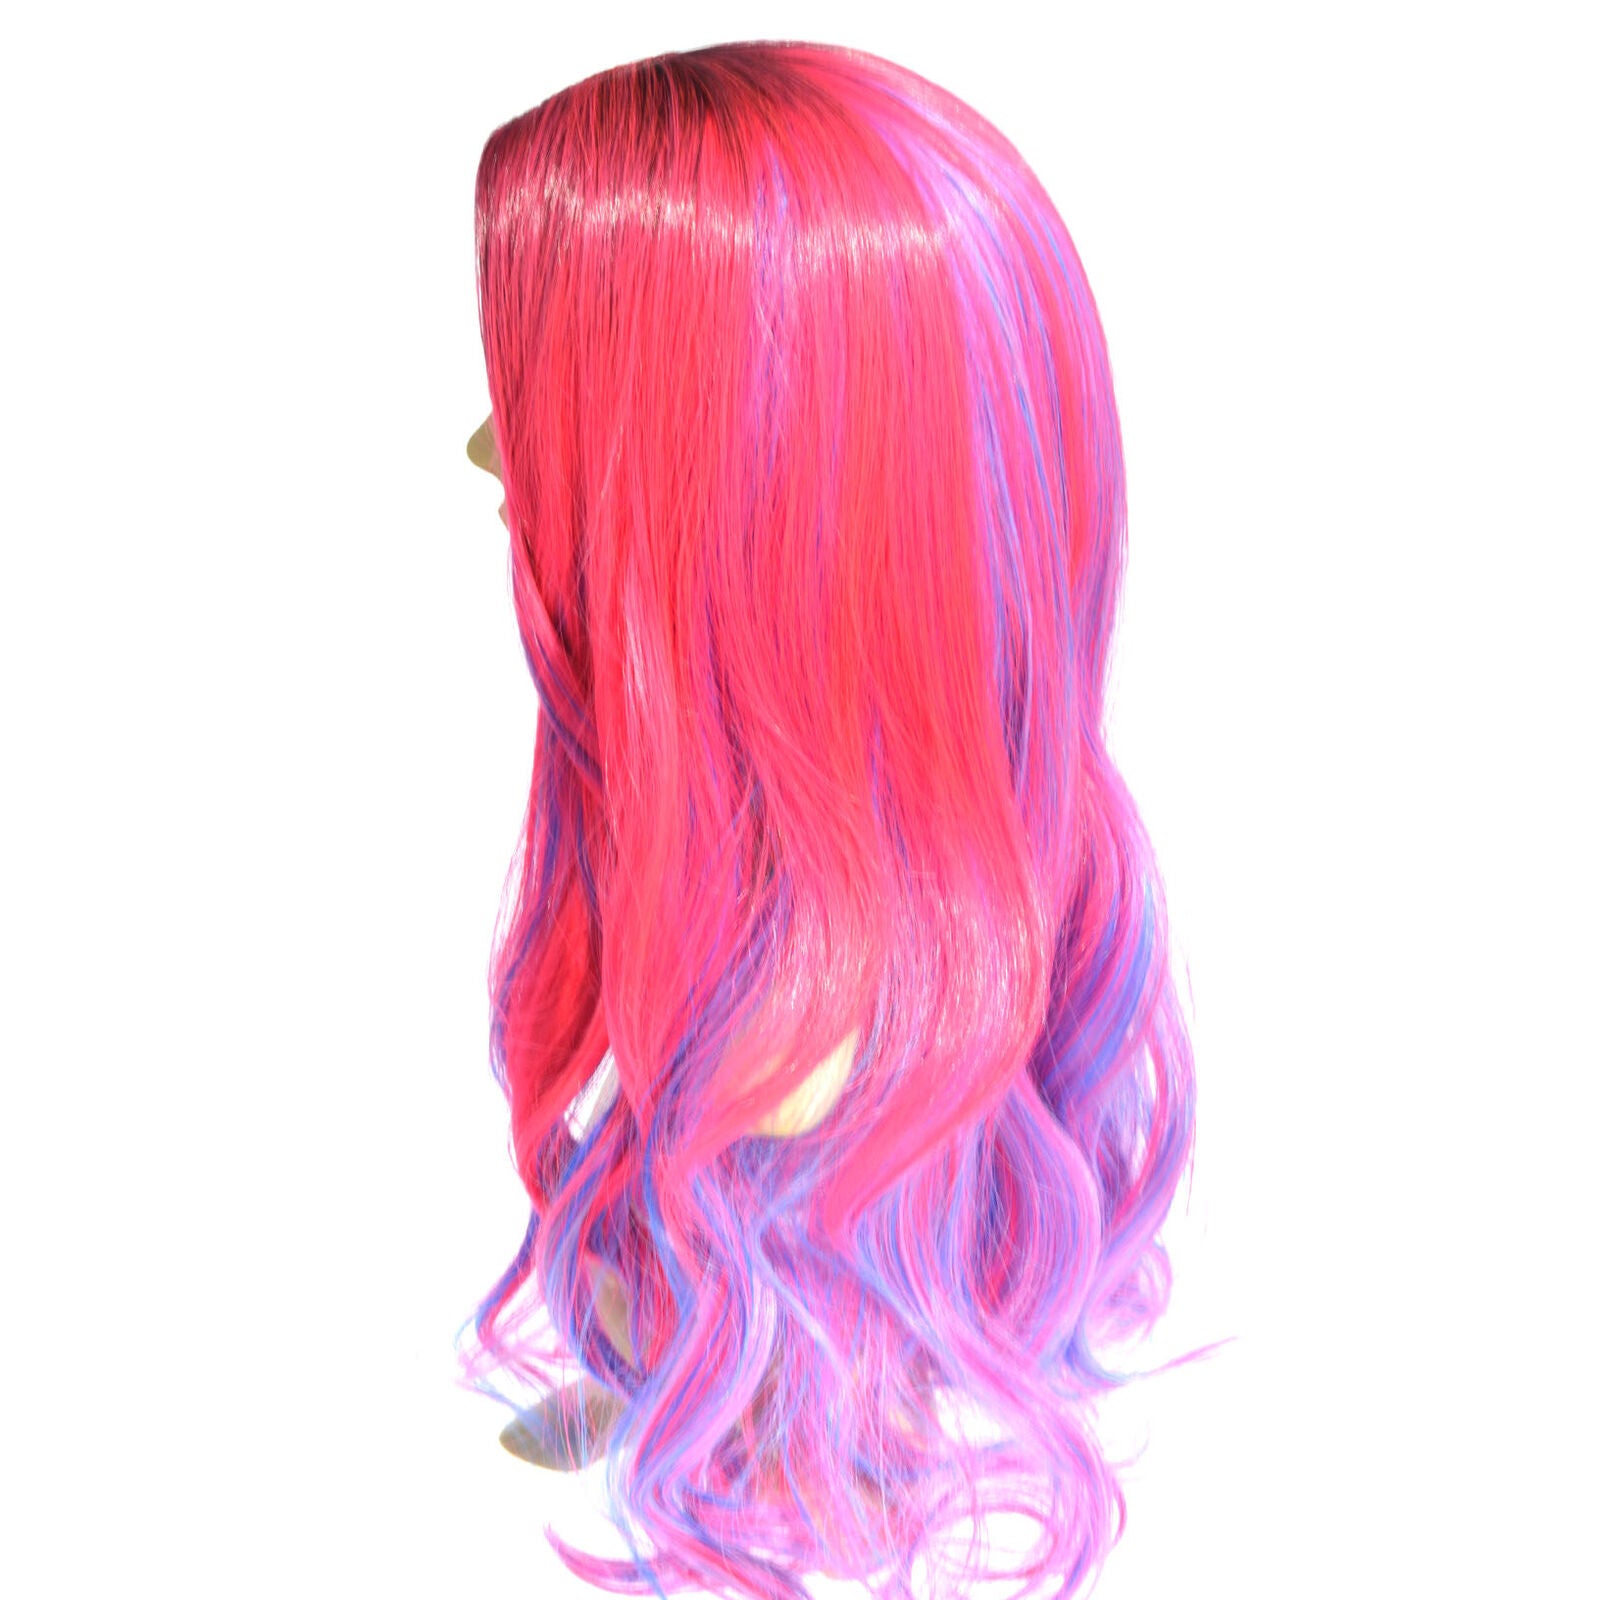 Inspired by Descendants 3 Girls Audrey Wig Red Blue Long Curly Halloween Wigs